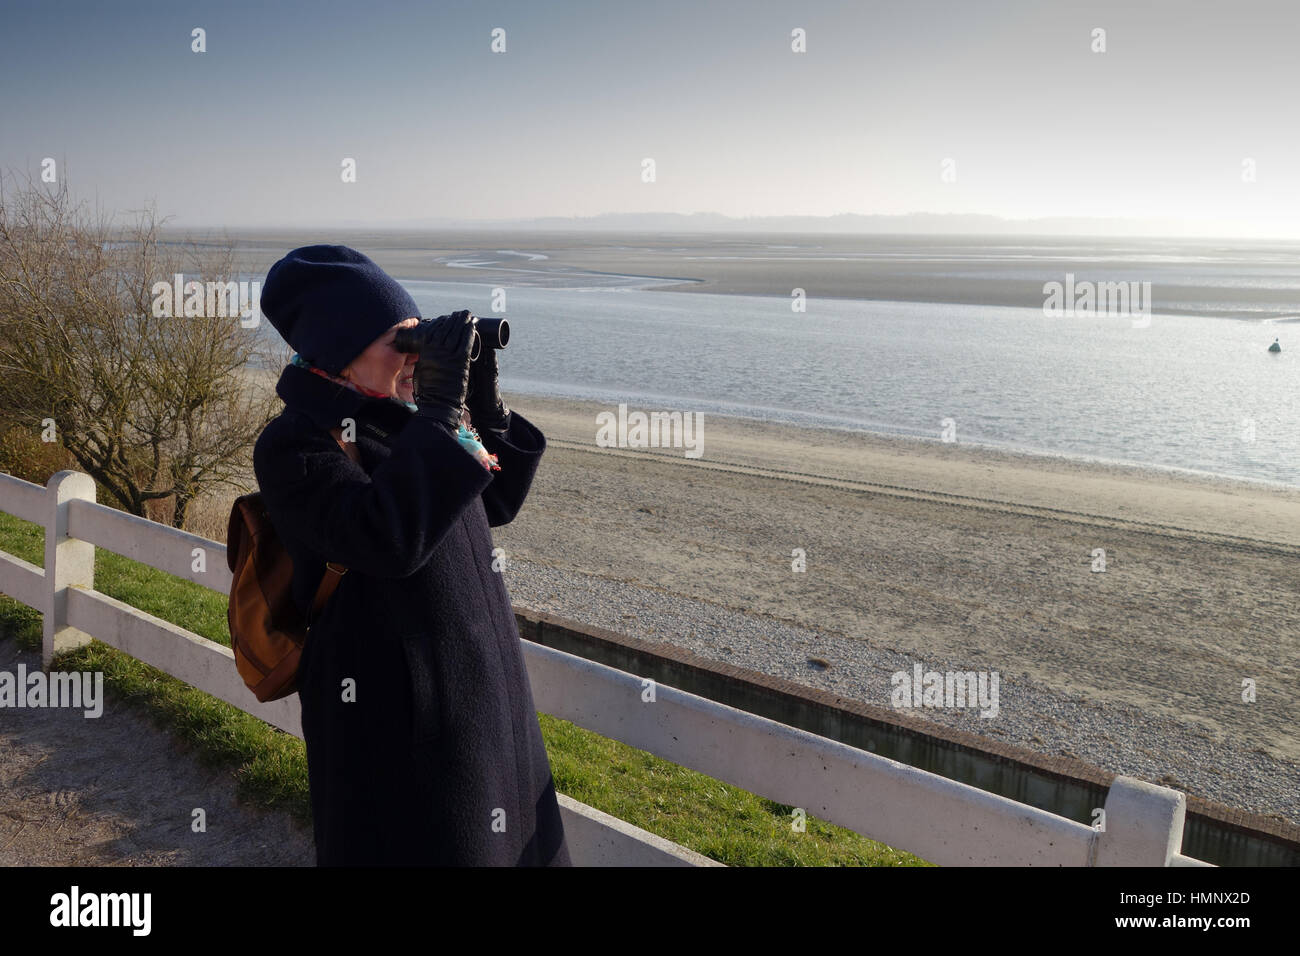 Le Crotoy in Northern France Baie de Somme estuary woman with binoculars Stock Photo